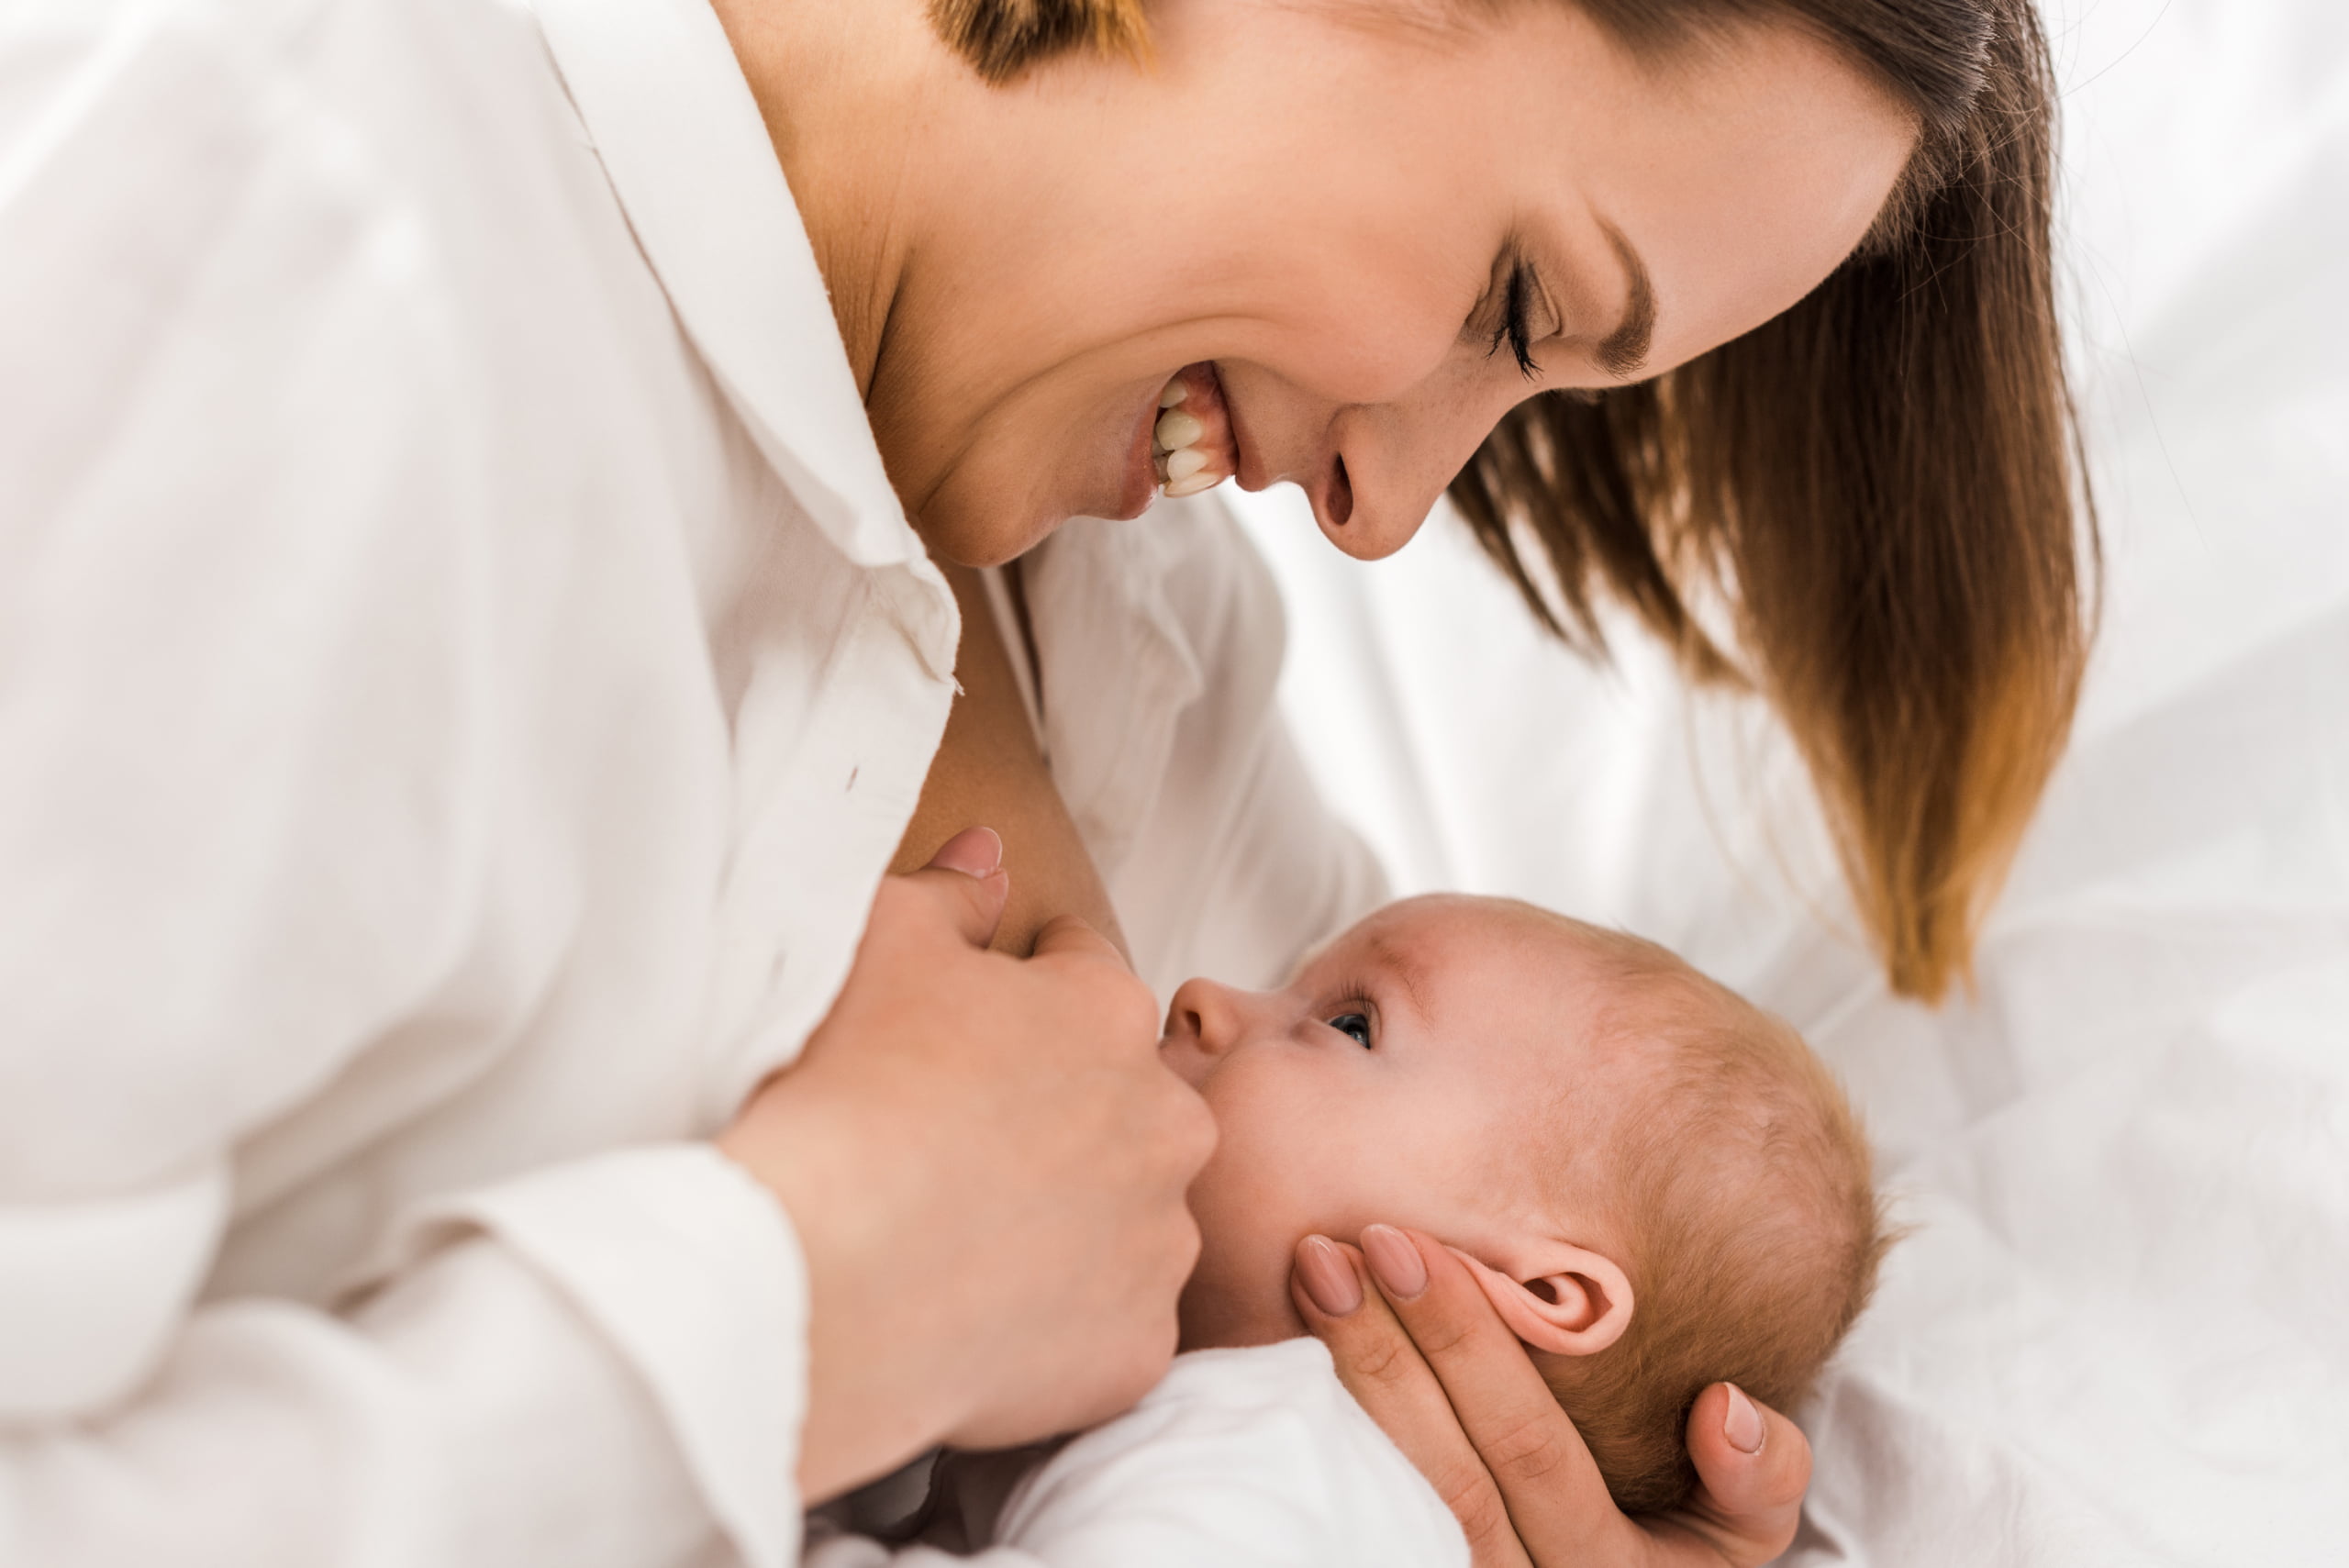 What Vitamins and Nutrients Do You Need When Breastfeeding?